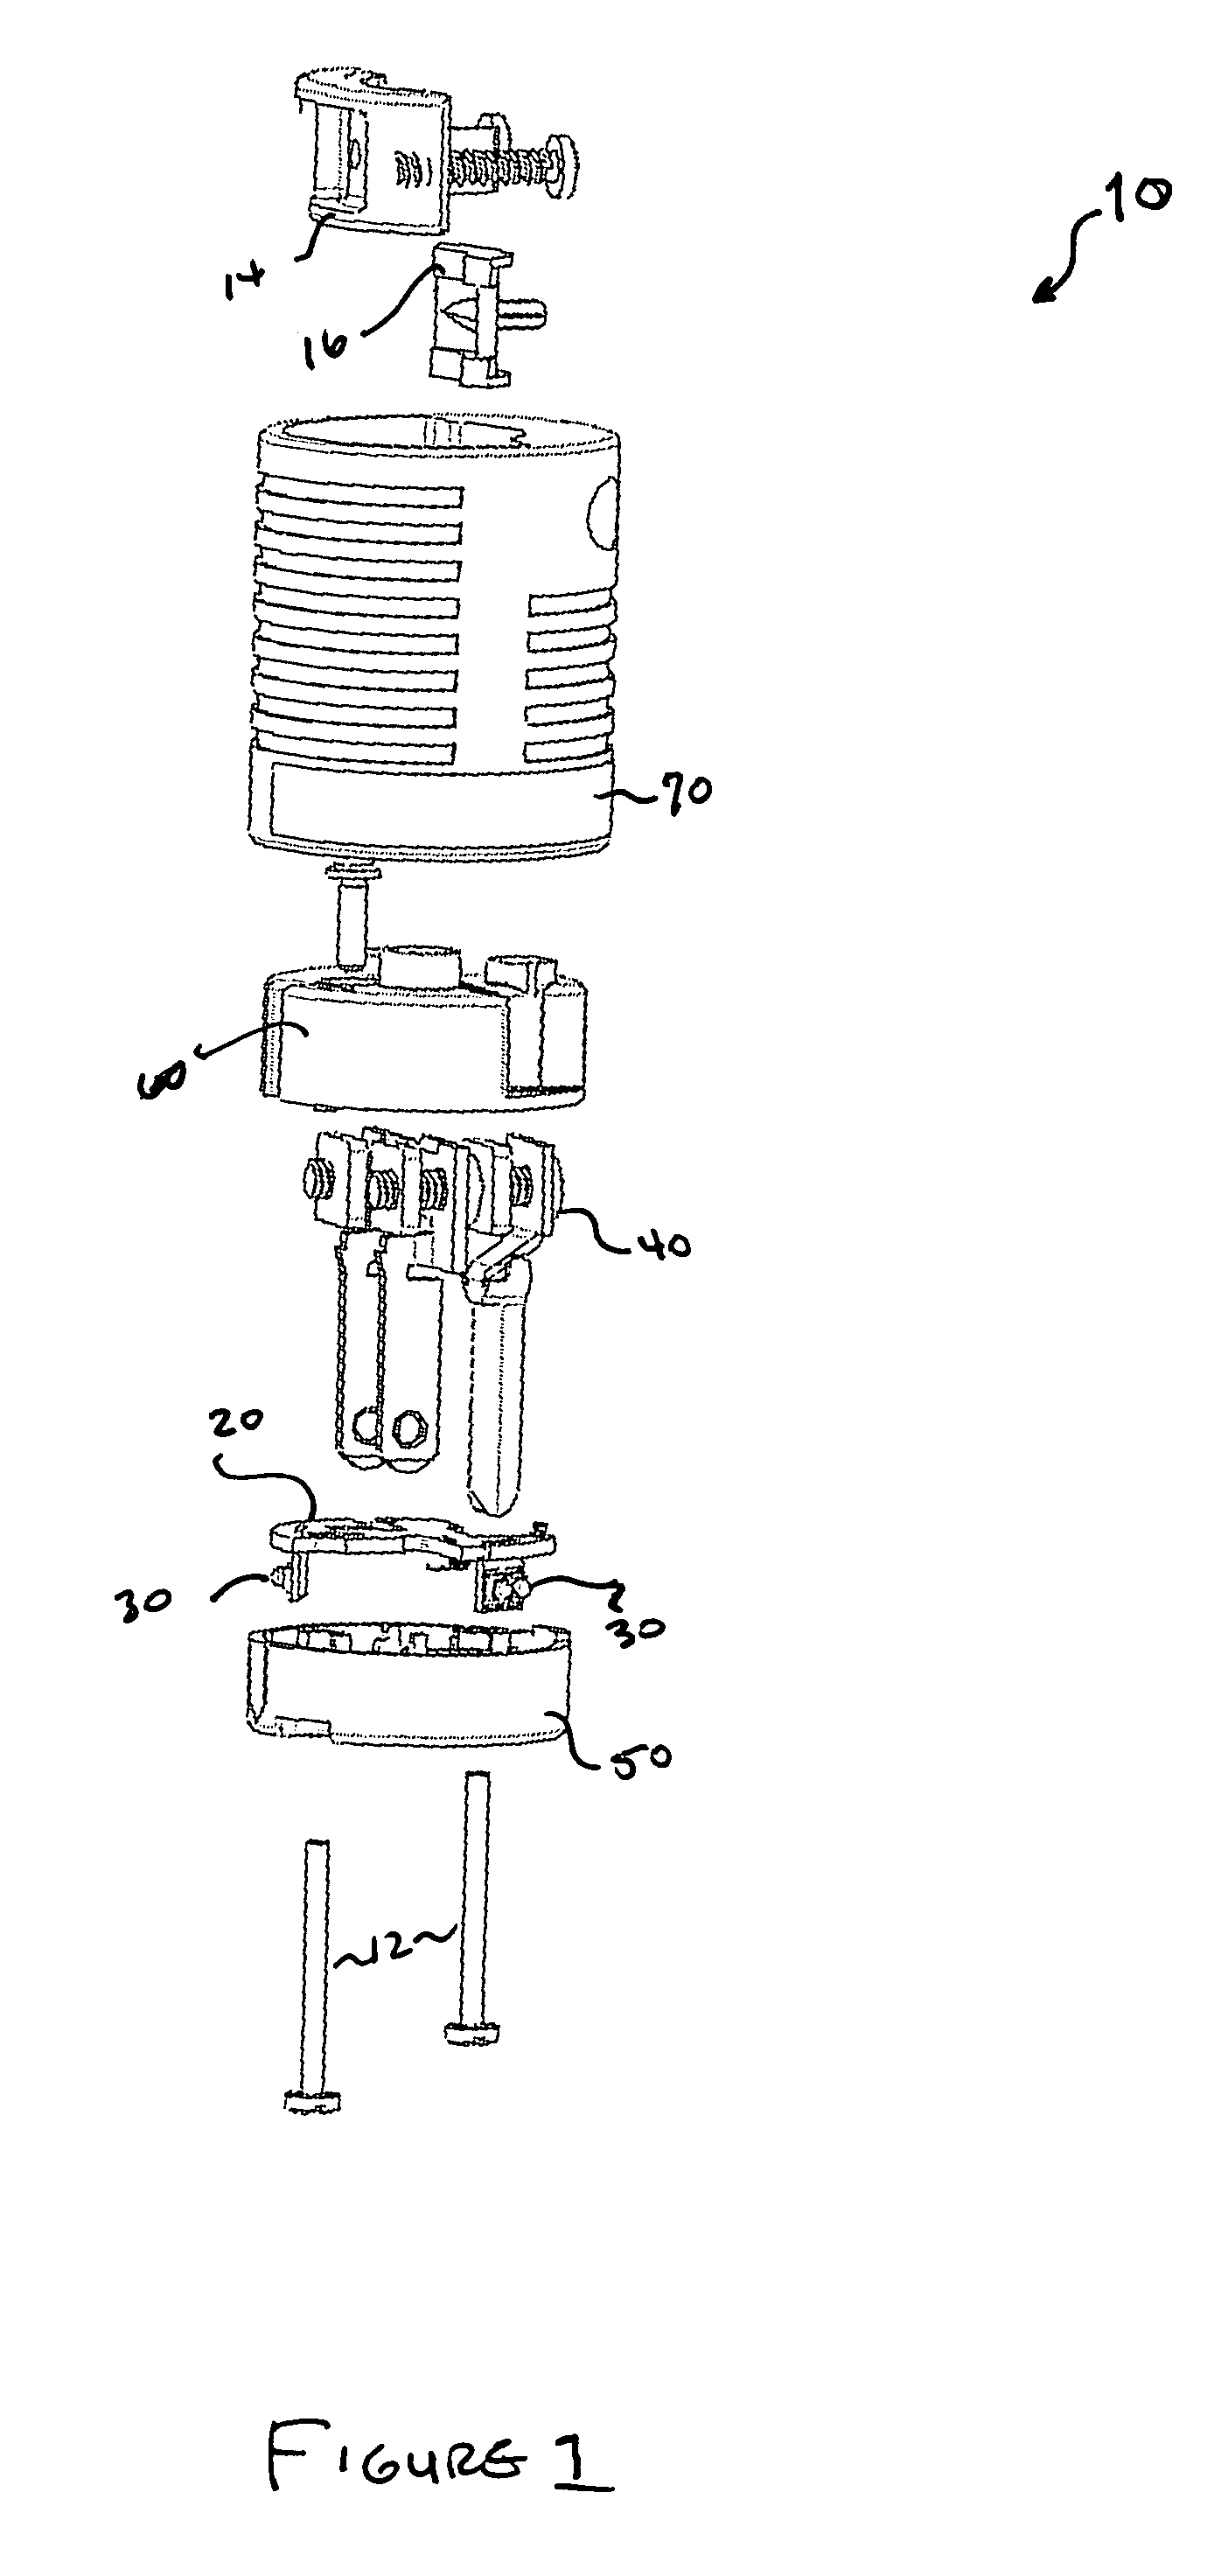 Electric circuit test device